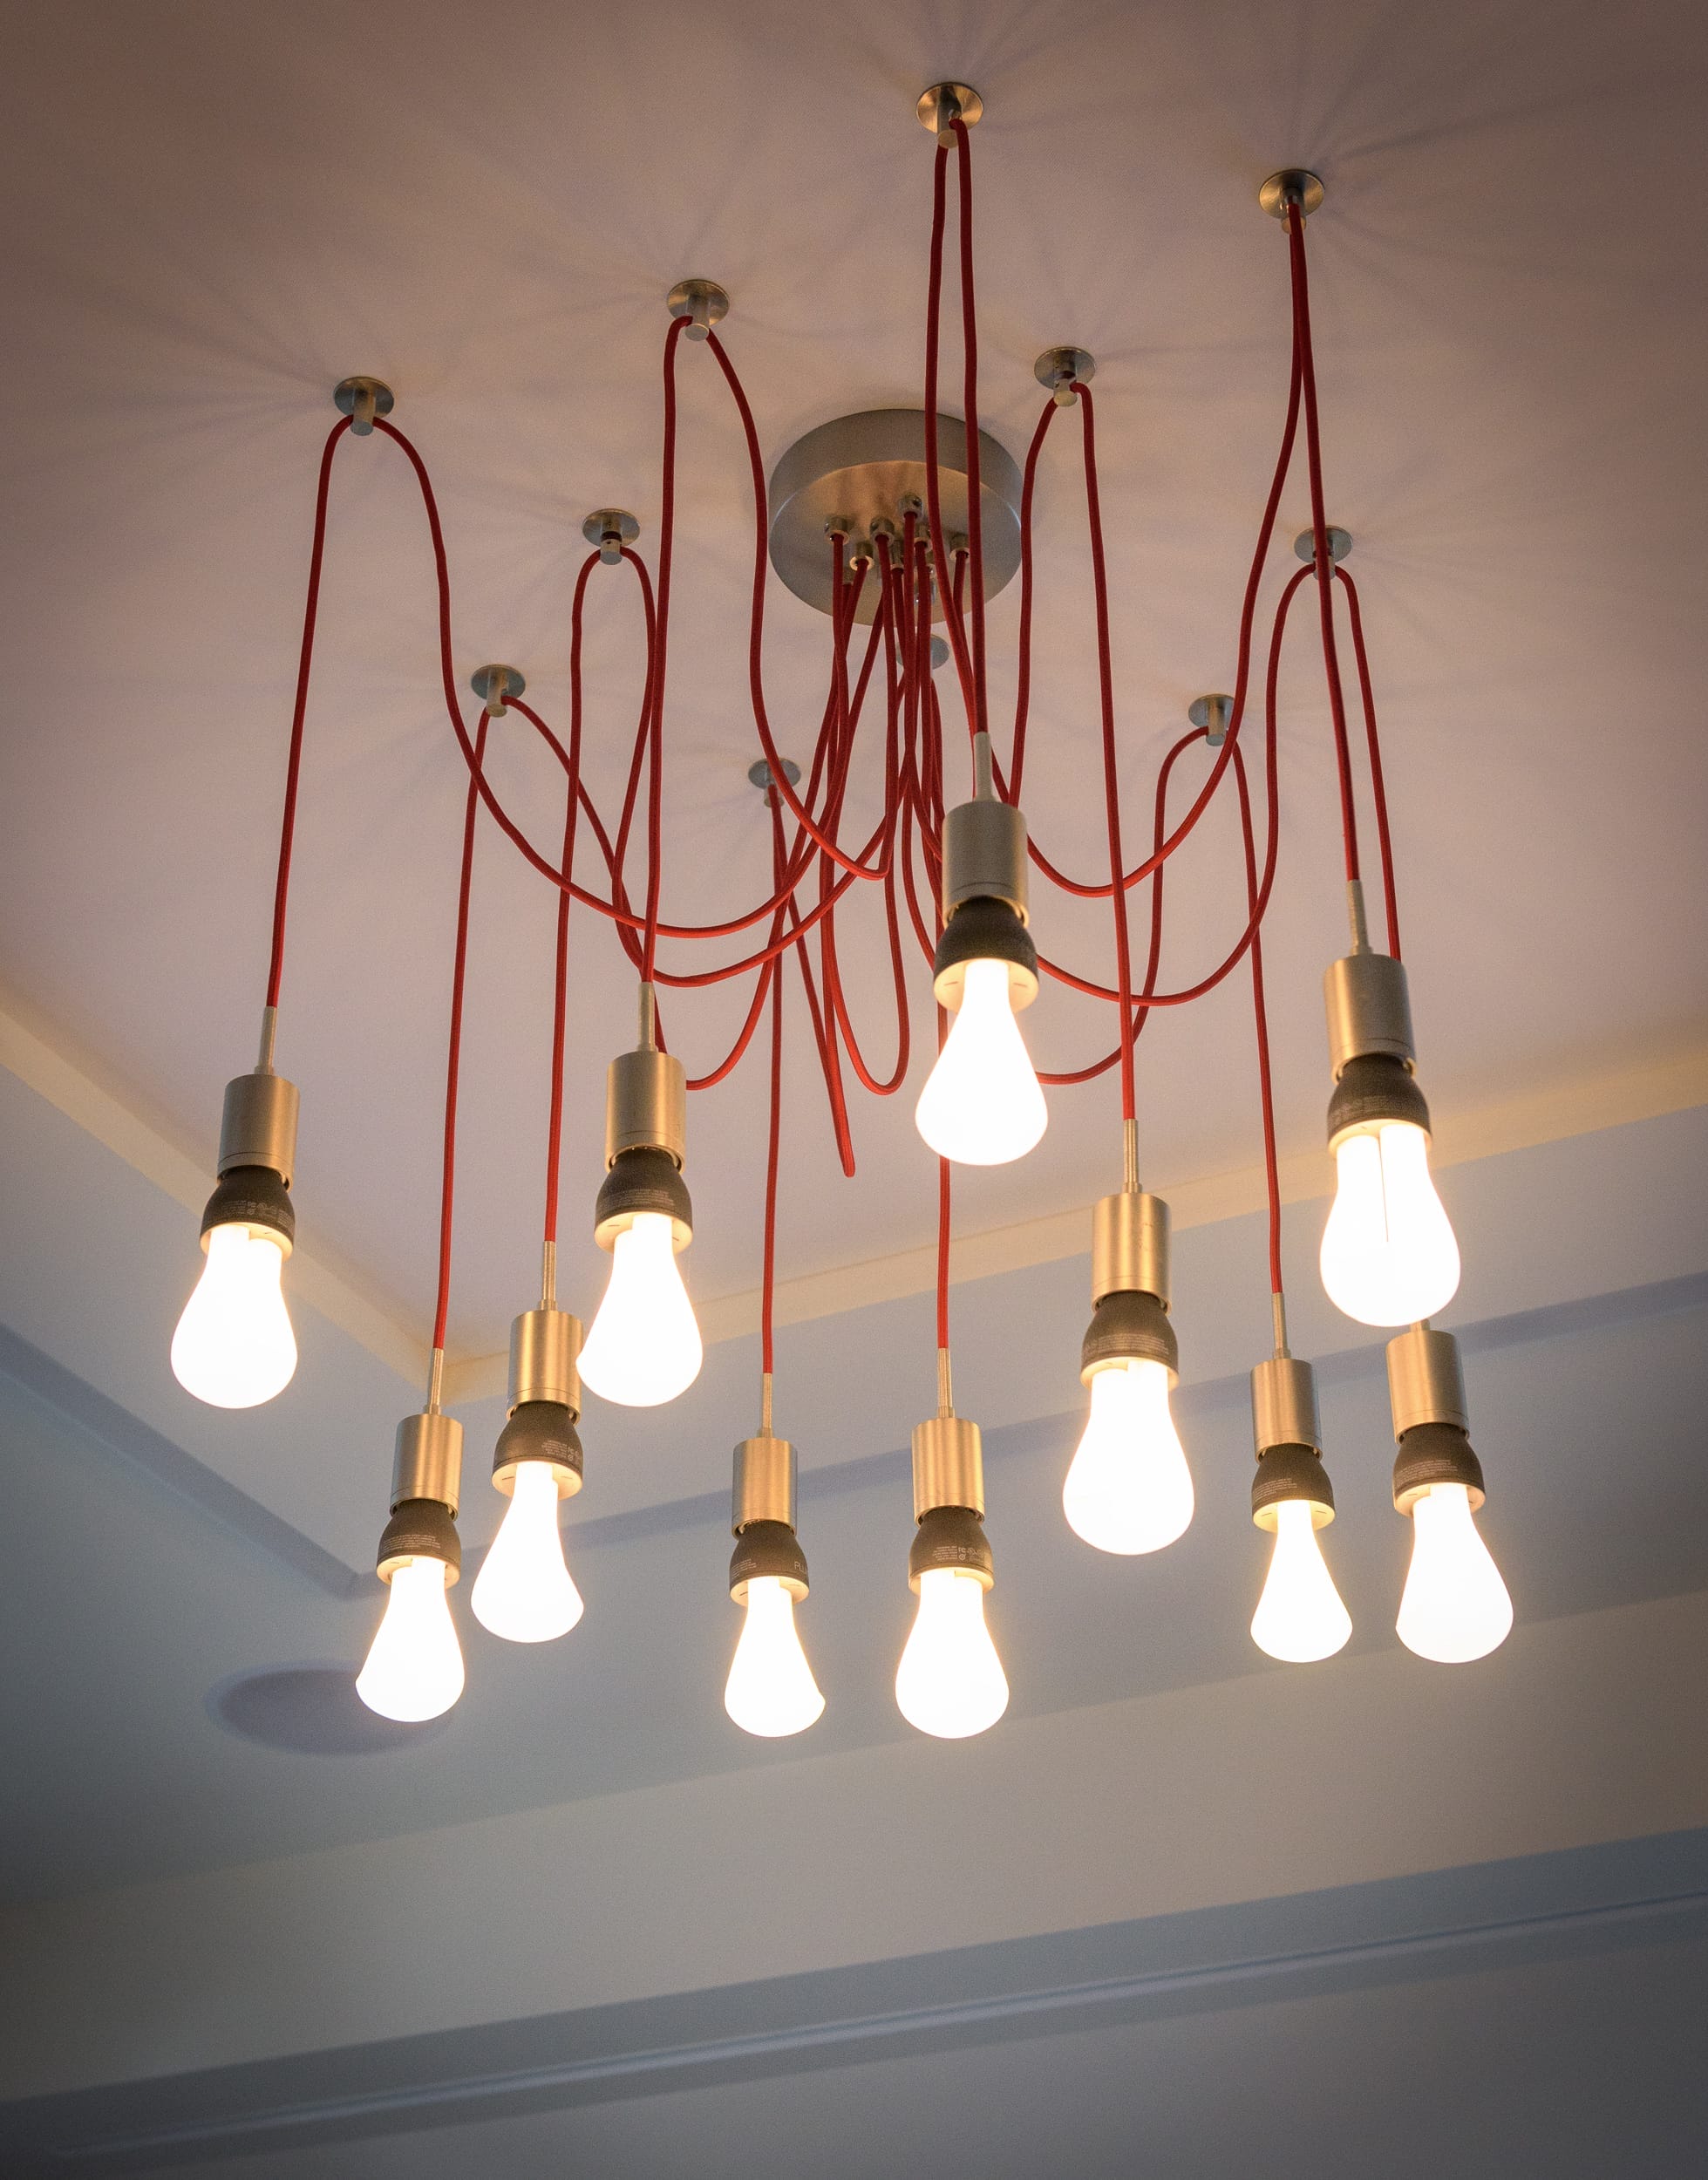 A room with many light bulbs hanging from the ceiling in a floating home.